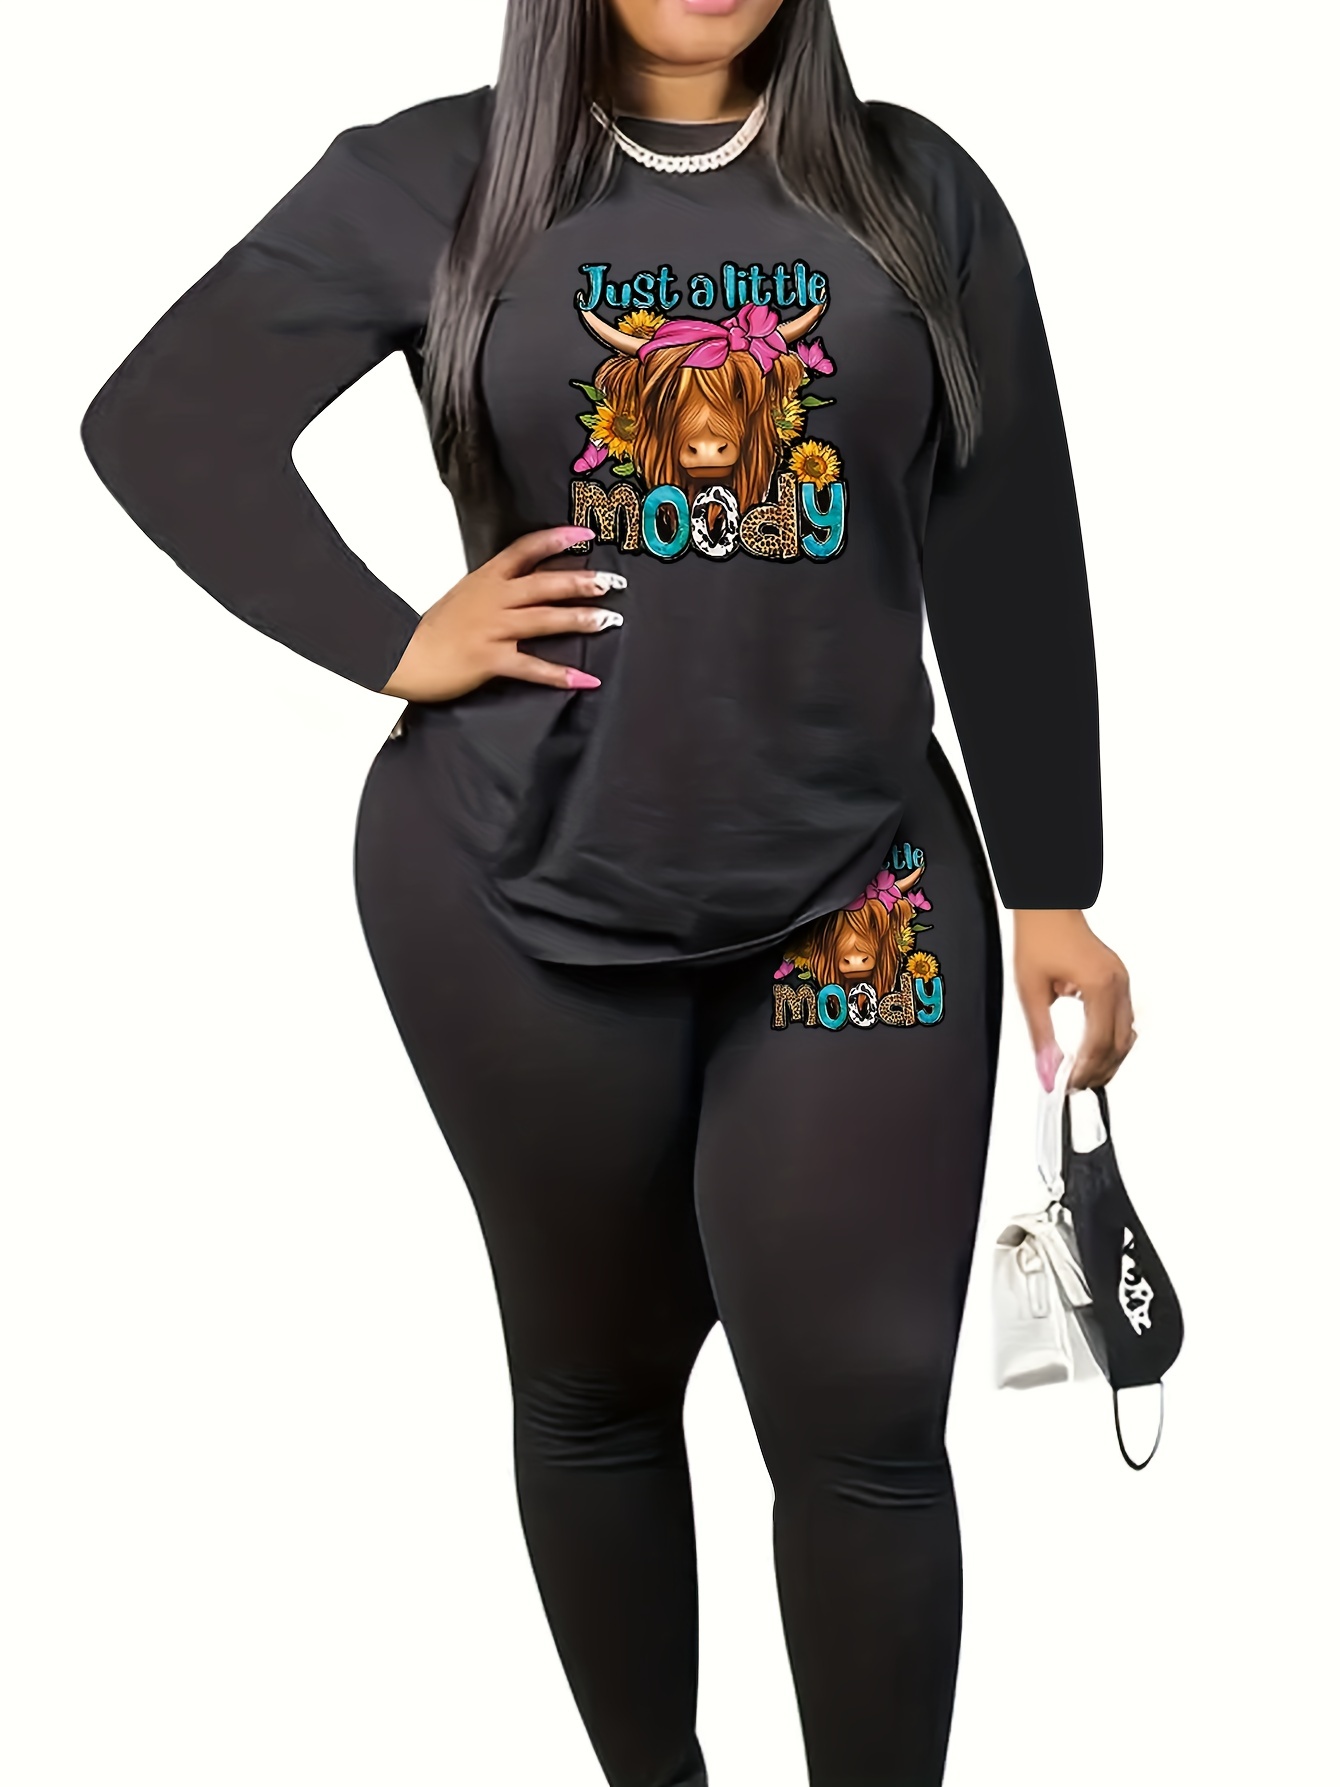 How to Wear Plus Size Leggings (Without Looking Ridiculous)